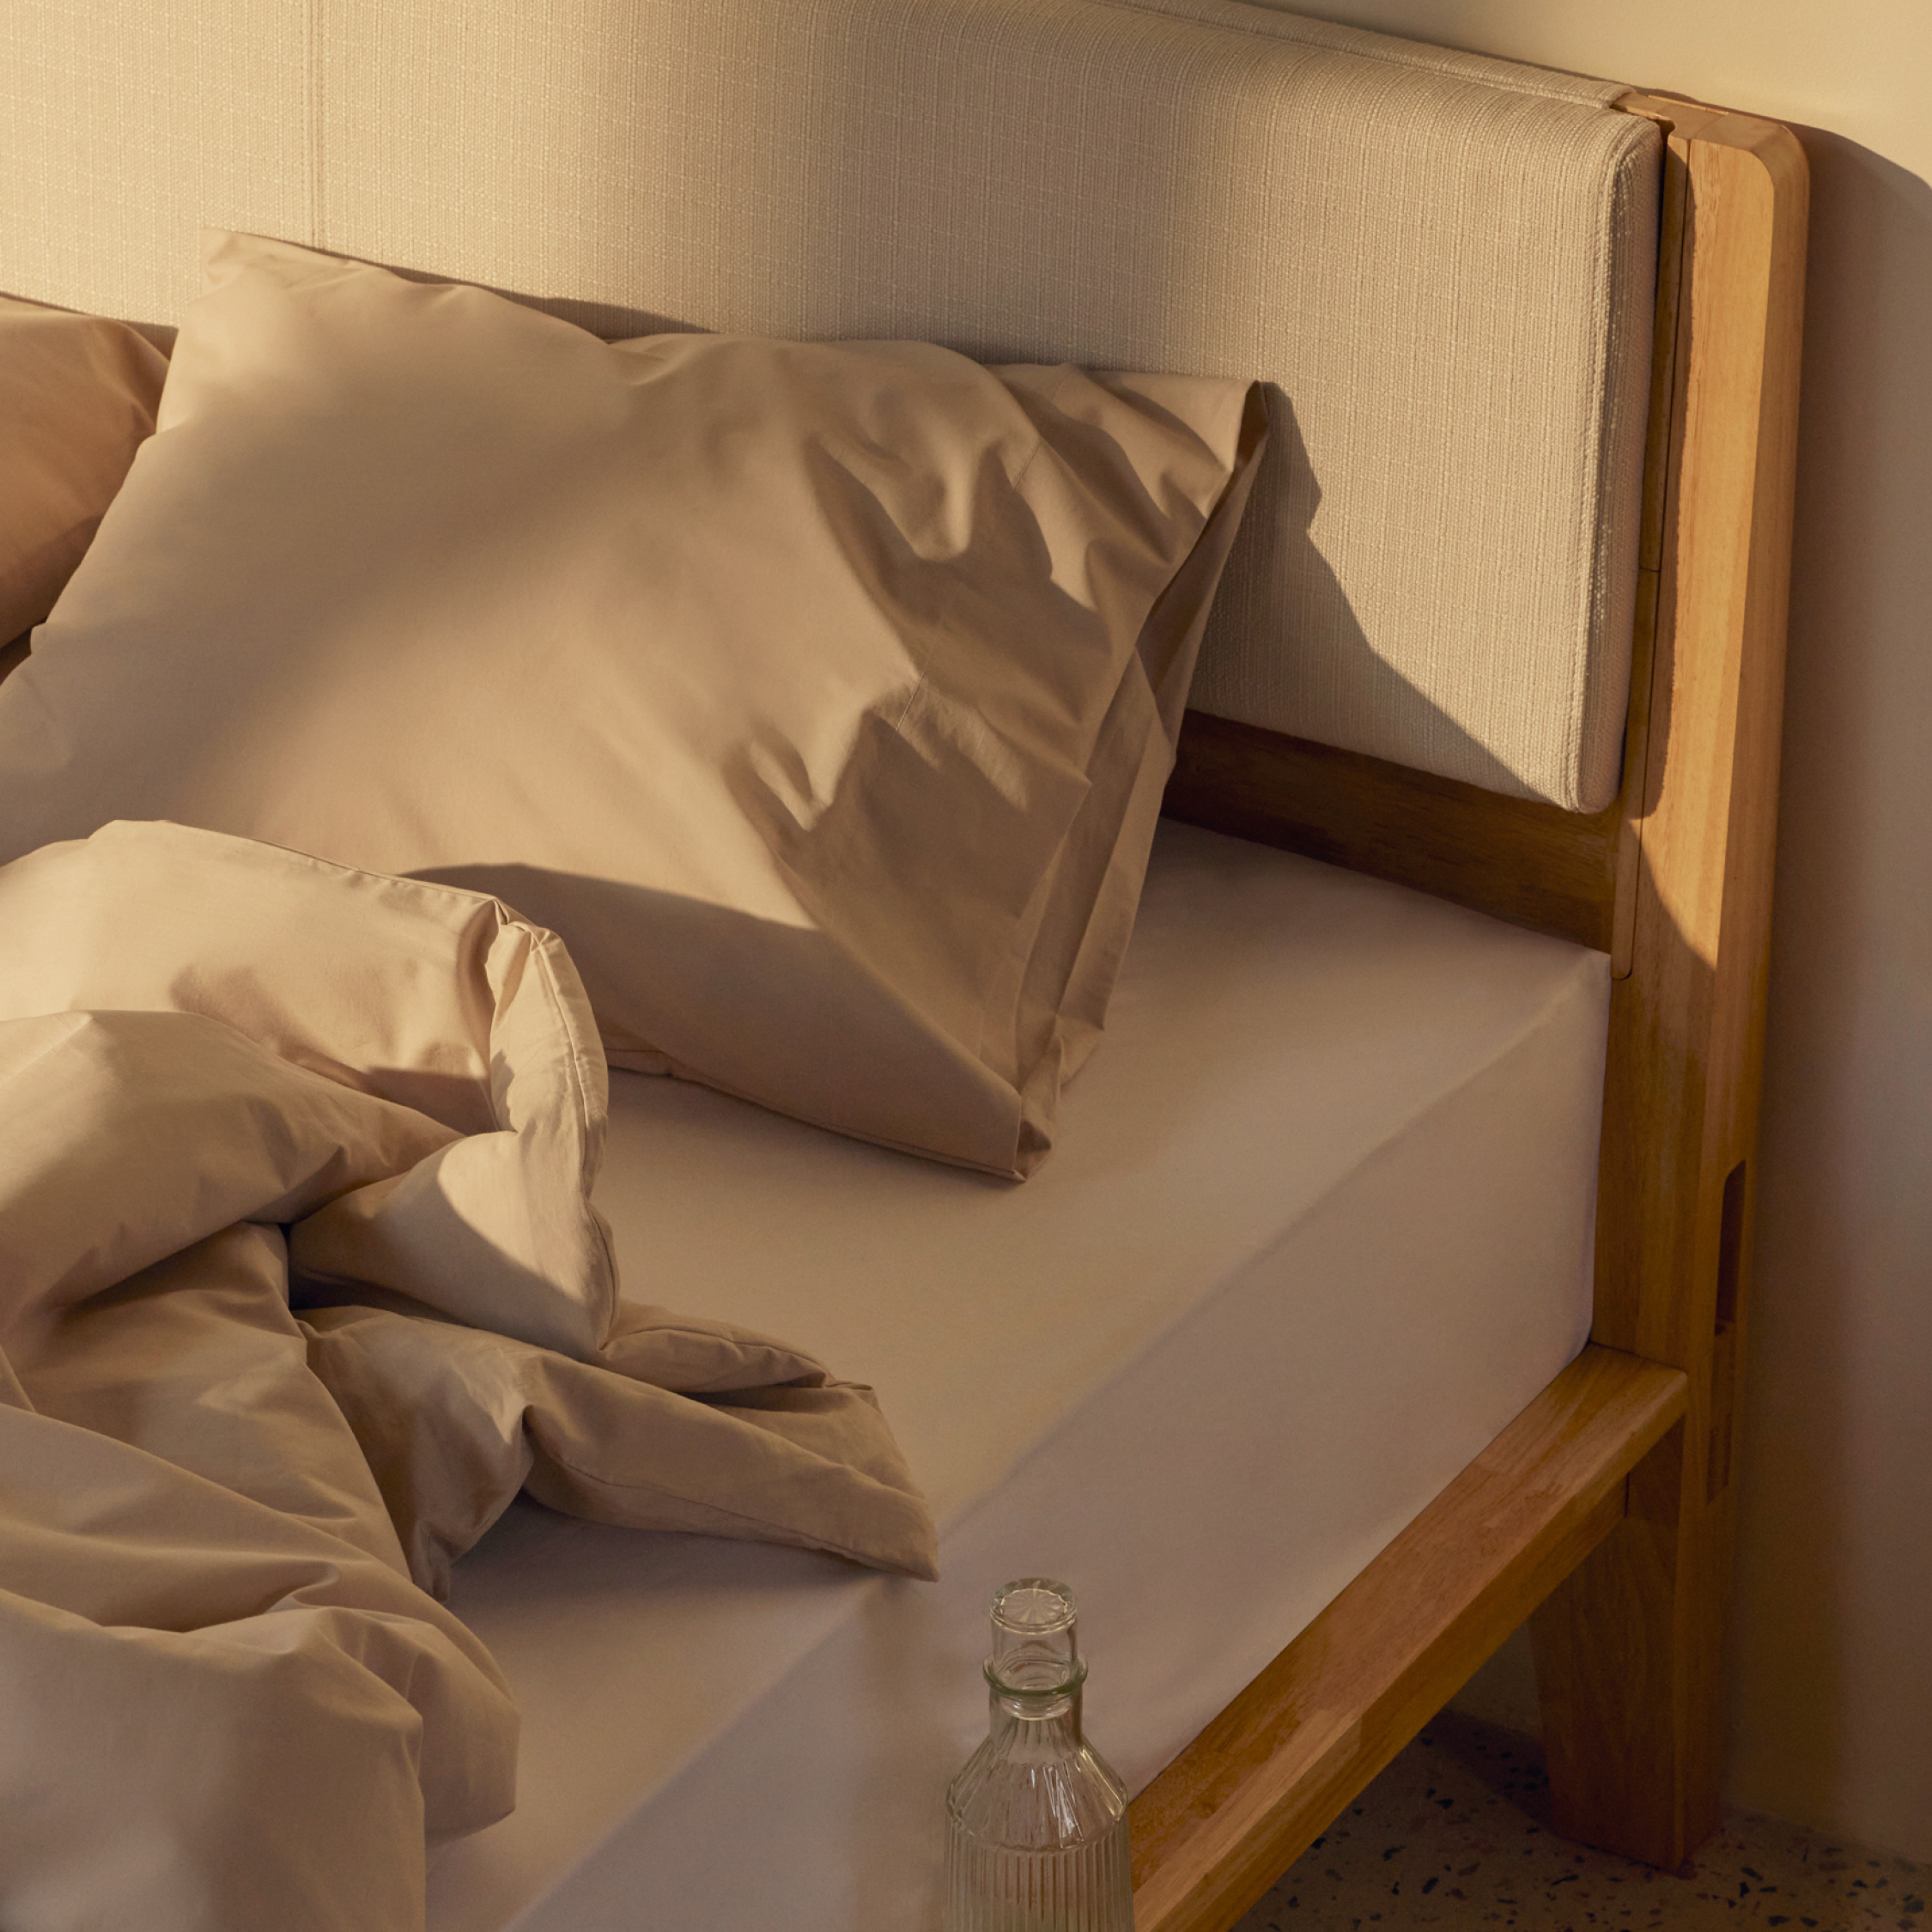 The Headboard Cushion, in Natural Lifestyle 11.13